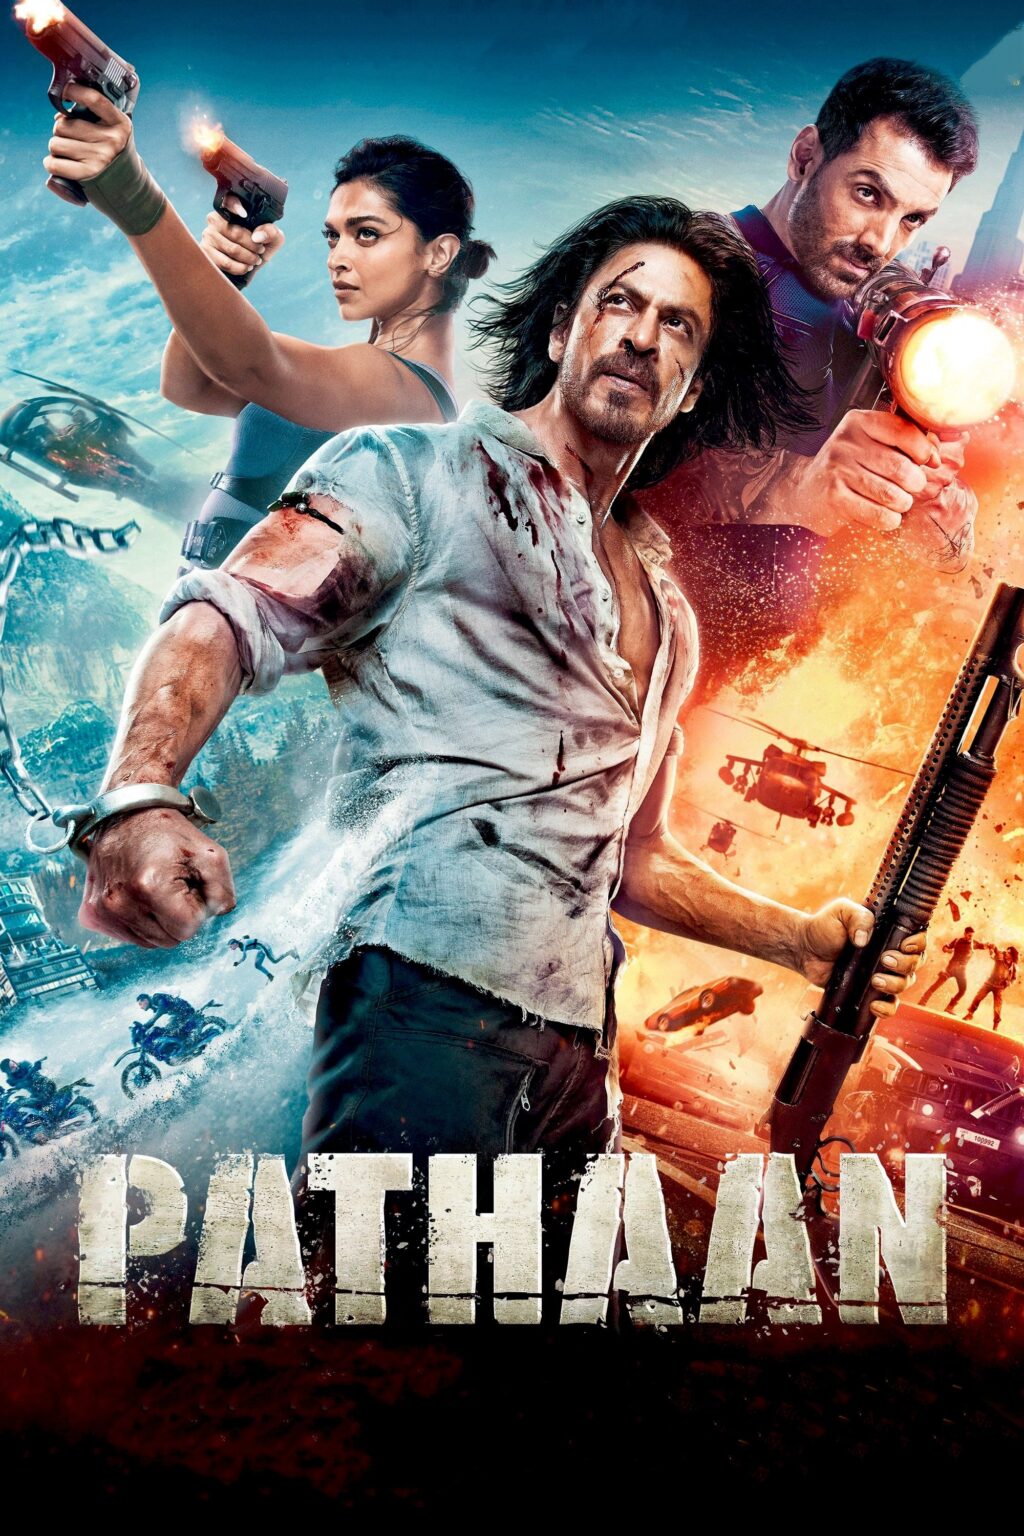 Poster for the movie "Pathaan"